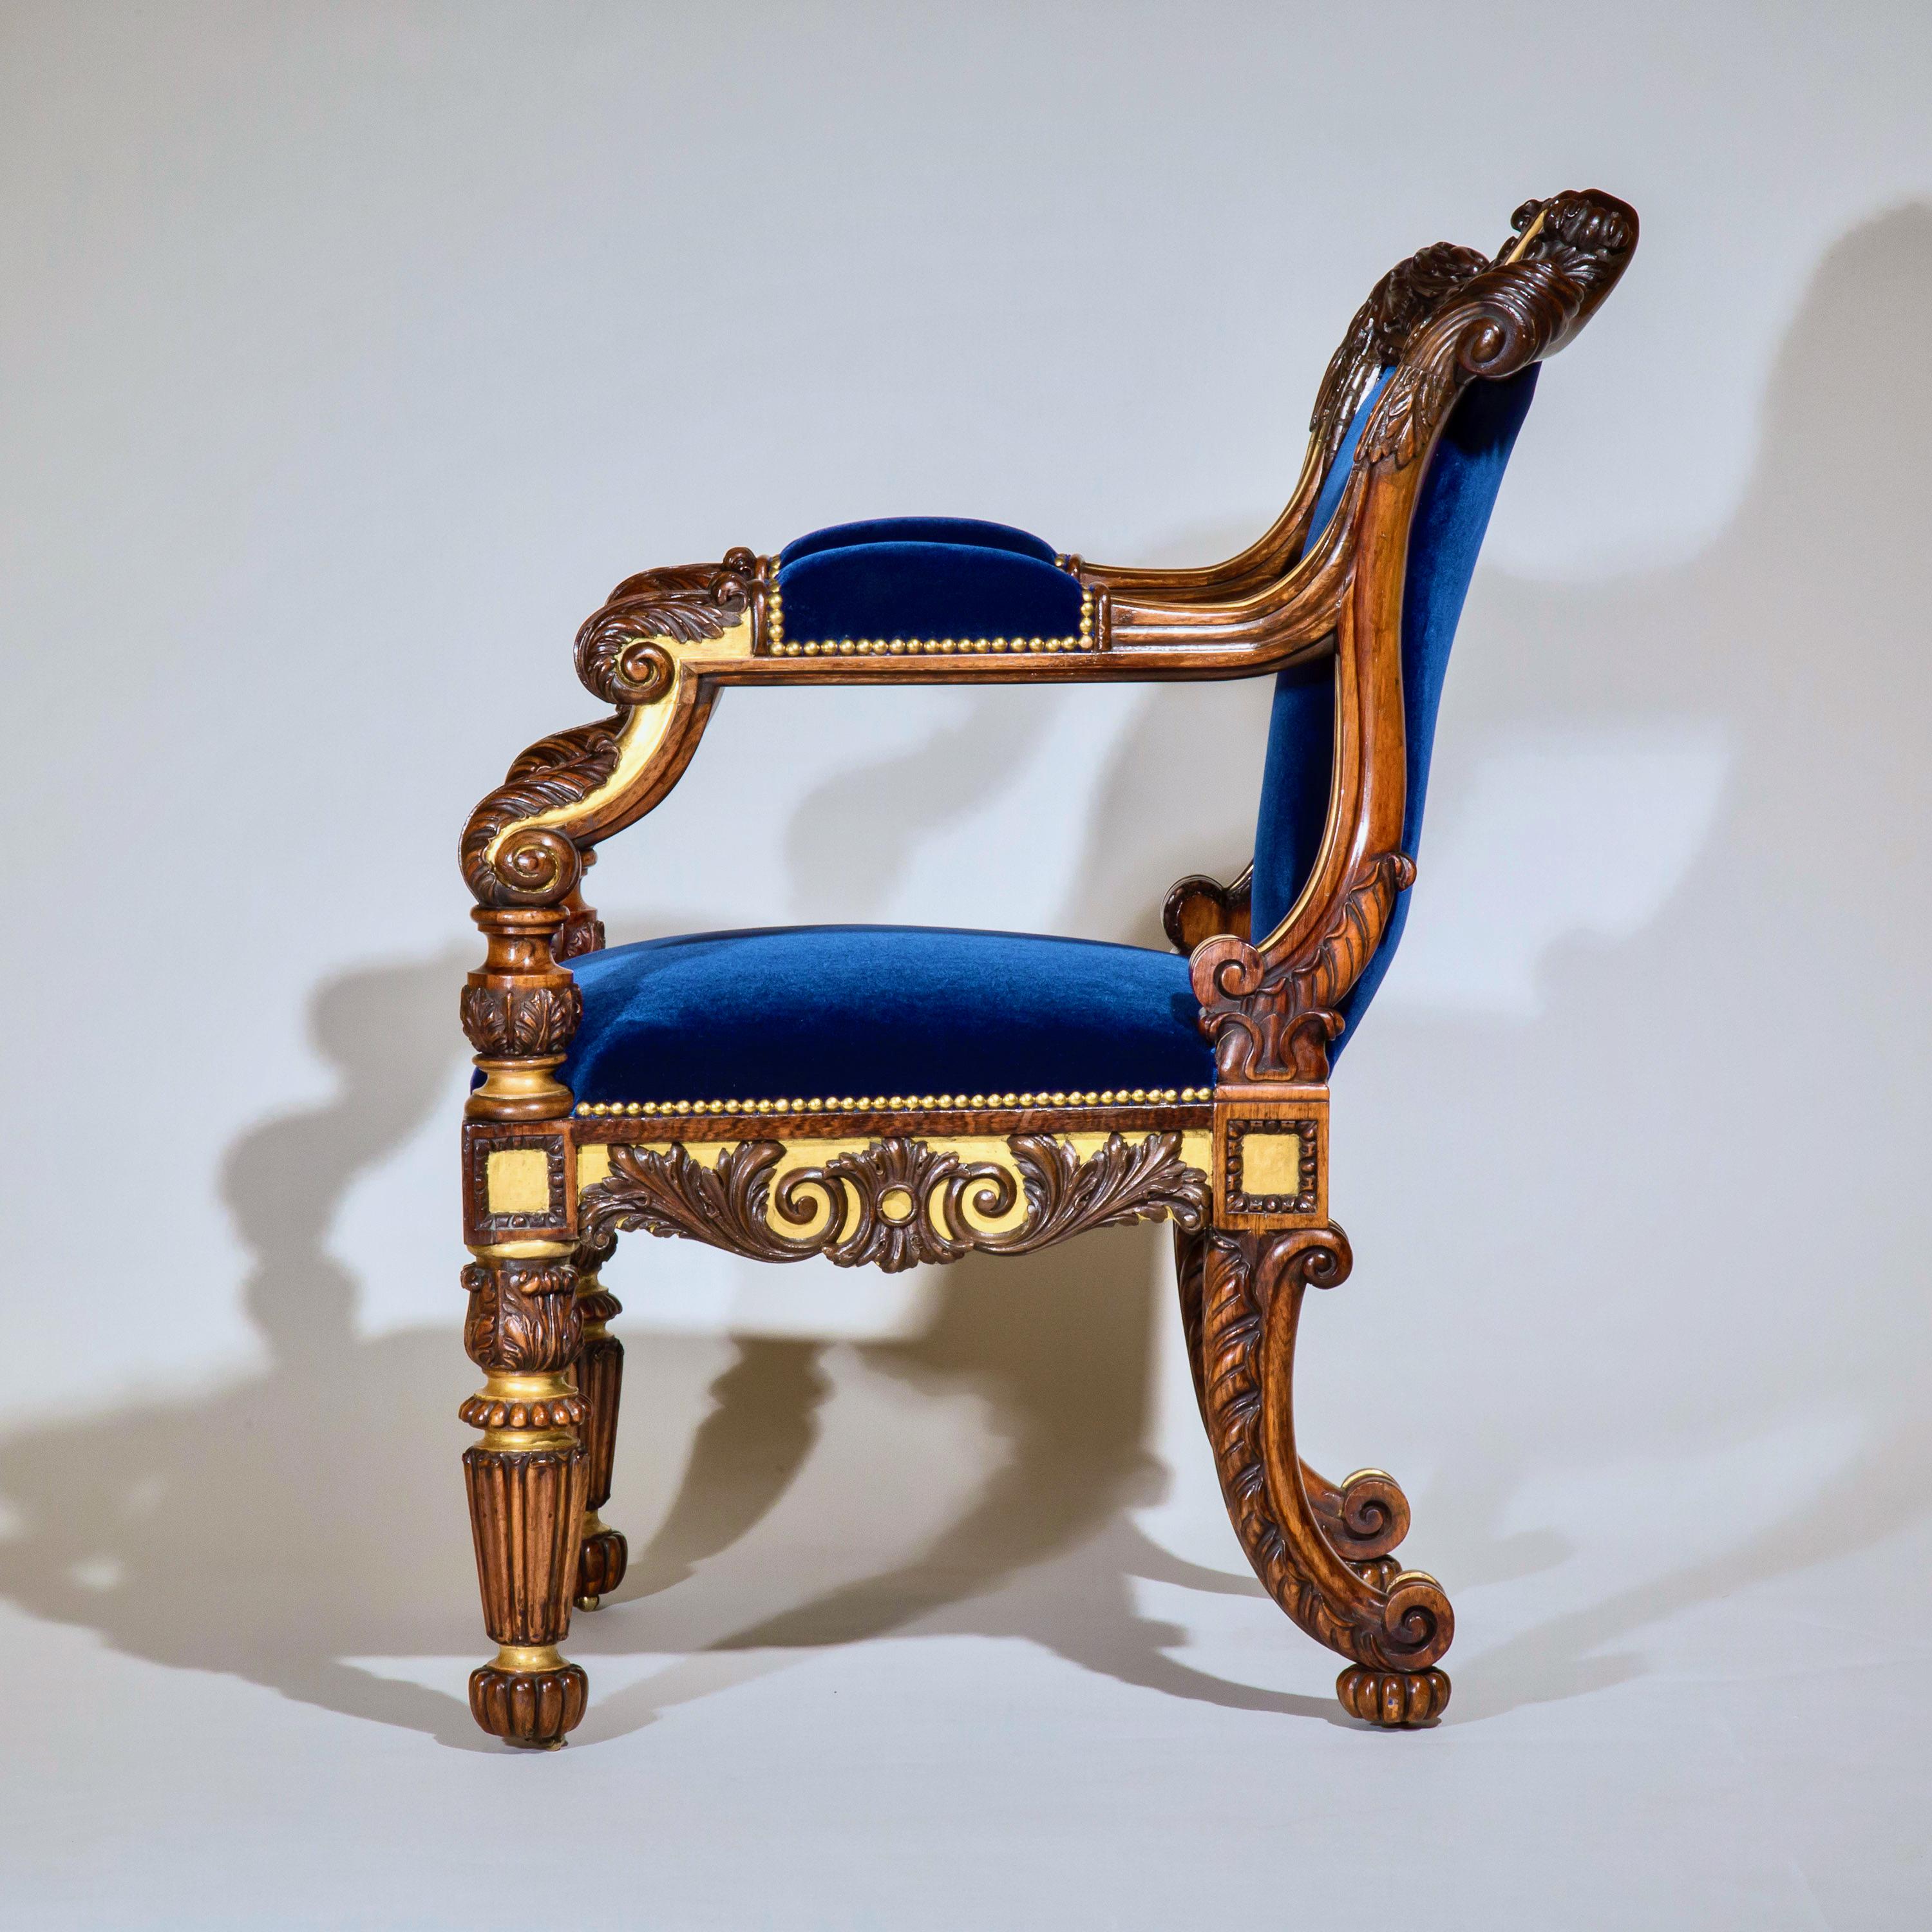 A fine quality early 19th century Regency, George IV period open armchair, attributed to Gillows of Lancaster and London.

English, circa 1825.

Illustrated: 

British Furniture: 1820 to 1920: The Luxury Market, Fig.1.23, page 31.

Why we like